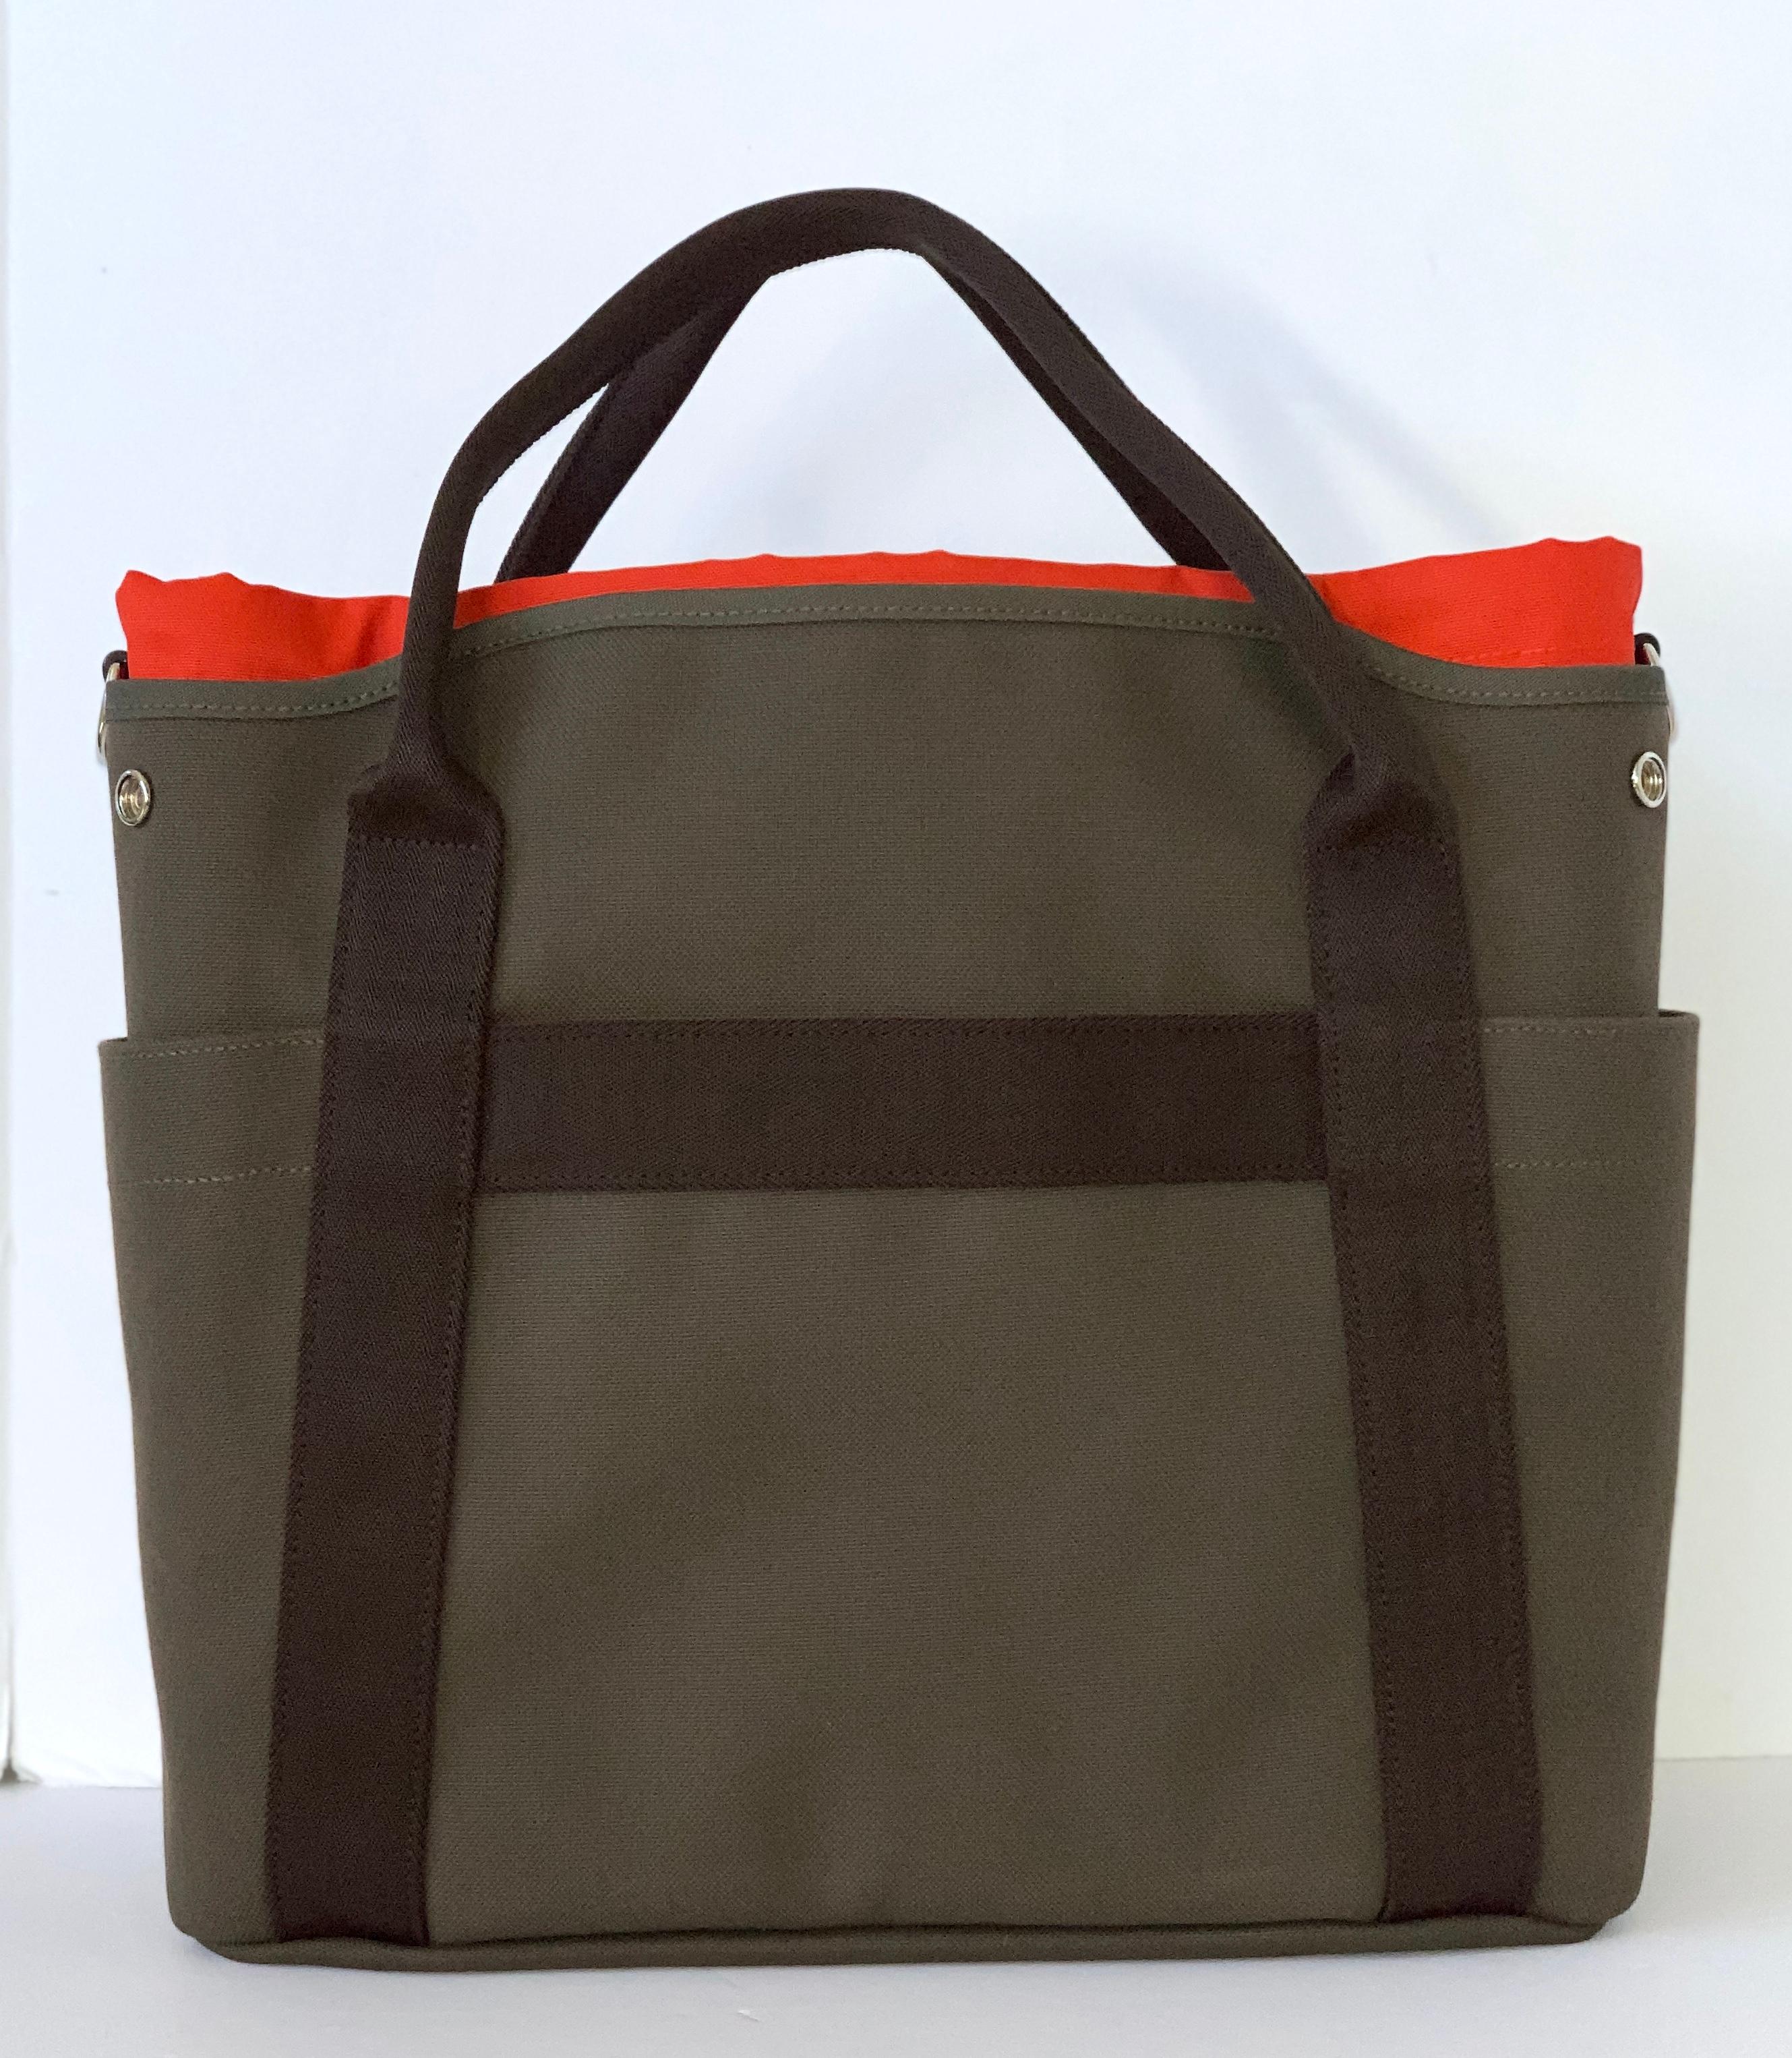 Groom boot and helmet bag
This bag makes a great travel bag.


Hermes functional grooming bag in canvas:
- Hard-wearing and water-resistant canvas
- Removable inside pouch, machine washable
- 3 inside pockets including 1 zipped pocket
- Removable